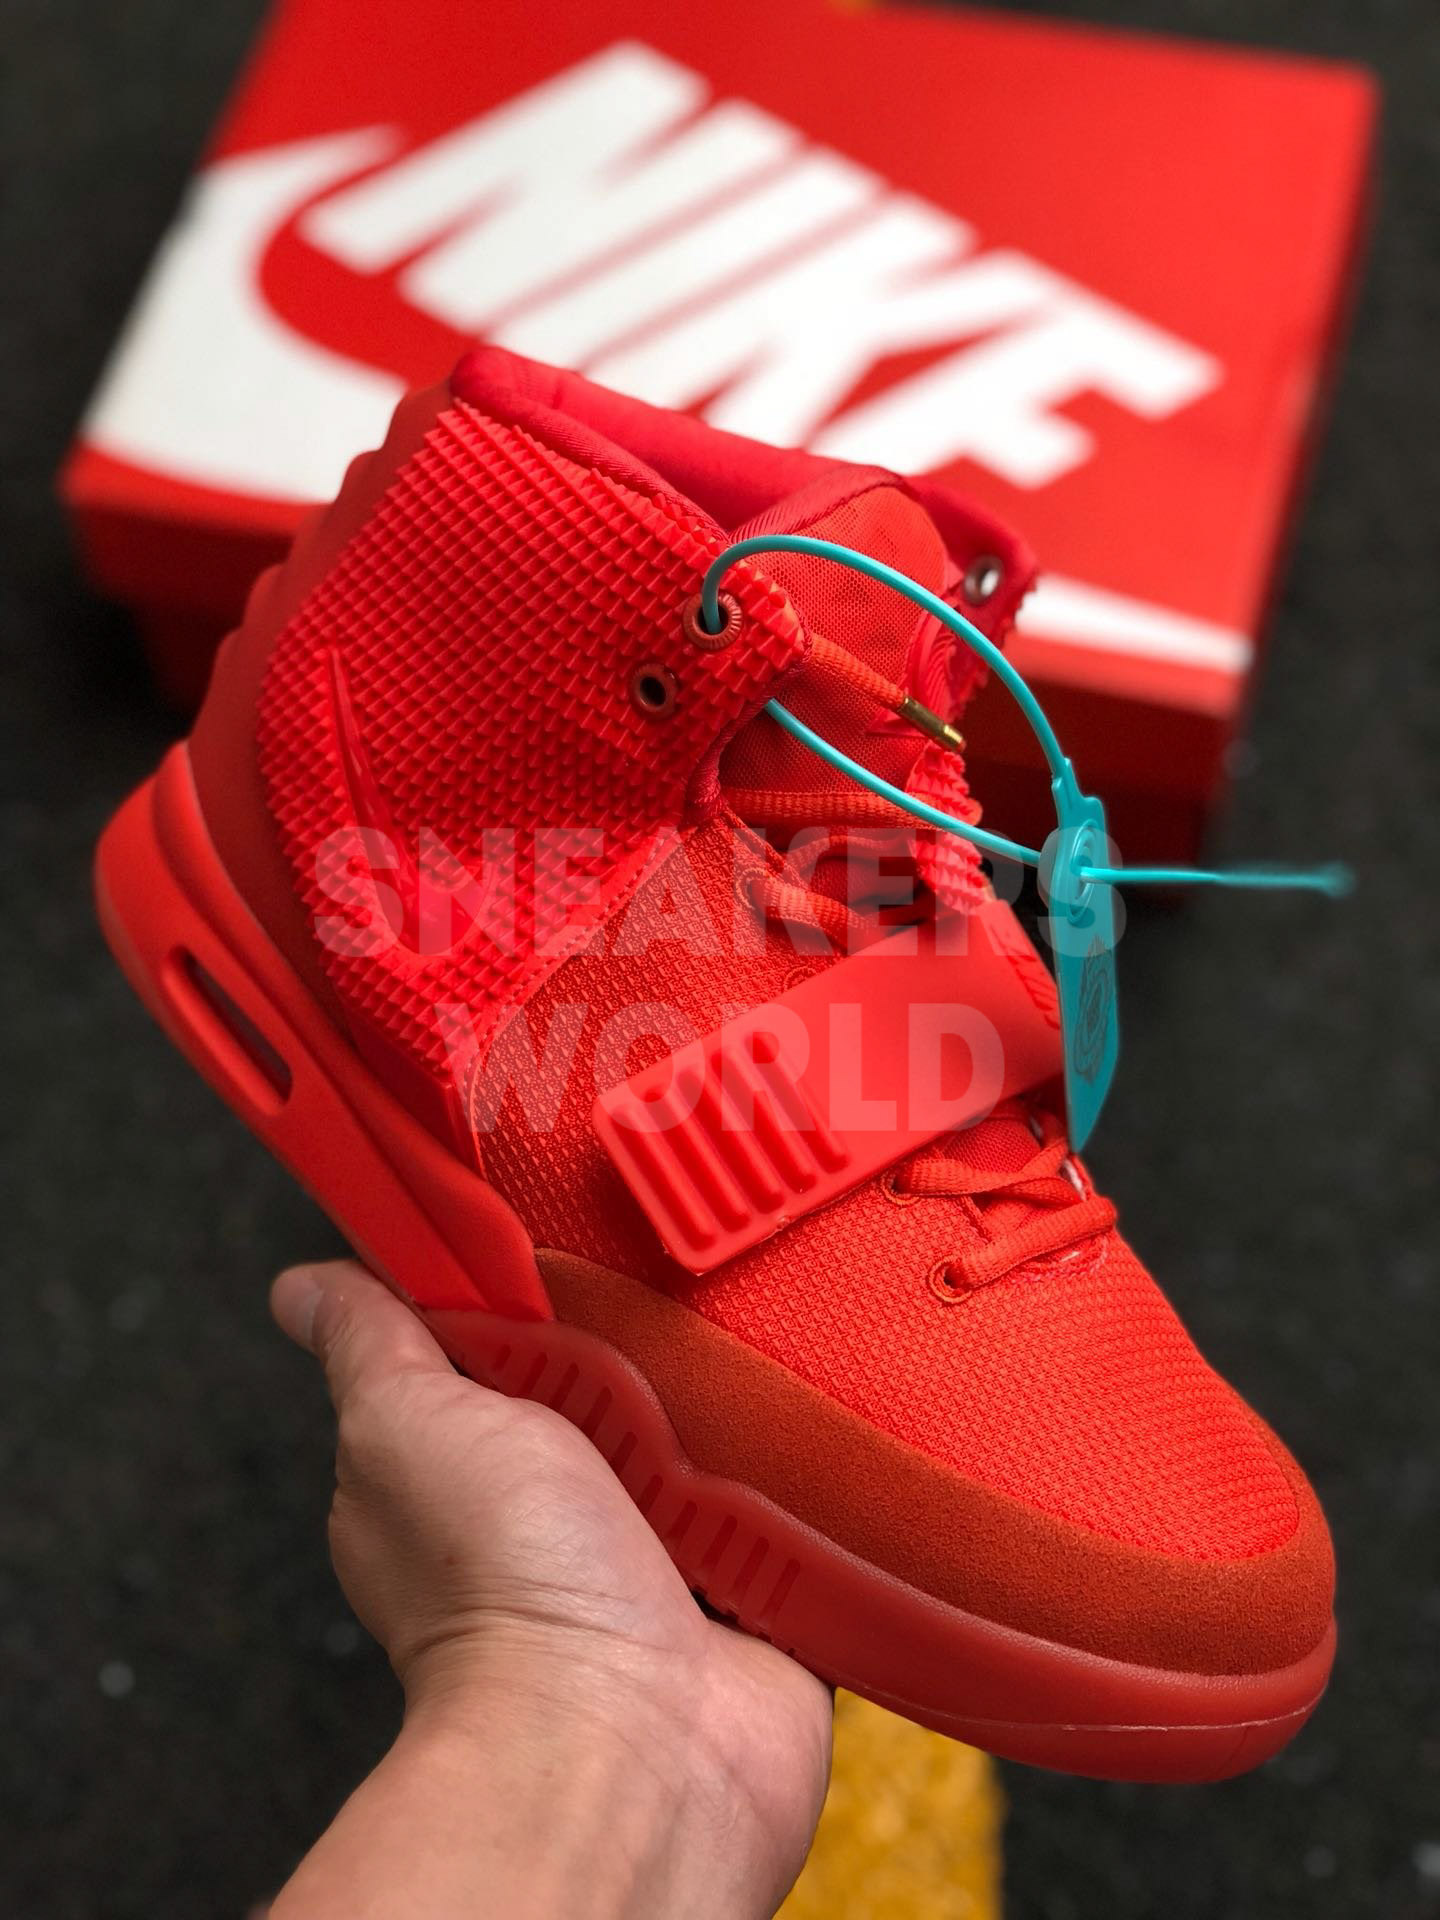 yeezy air 2 red october